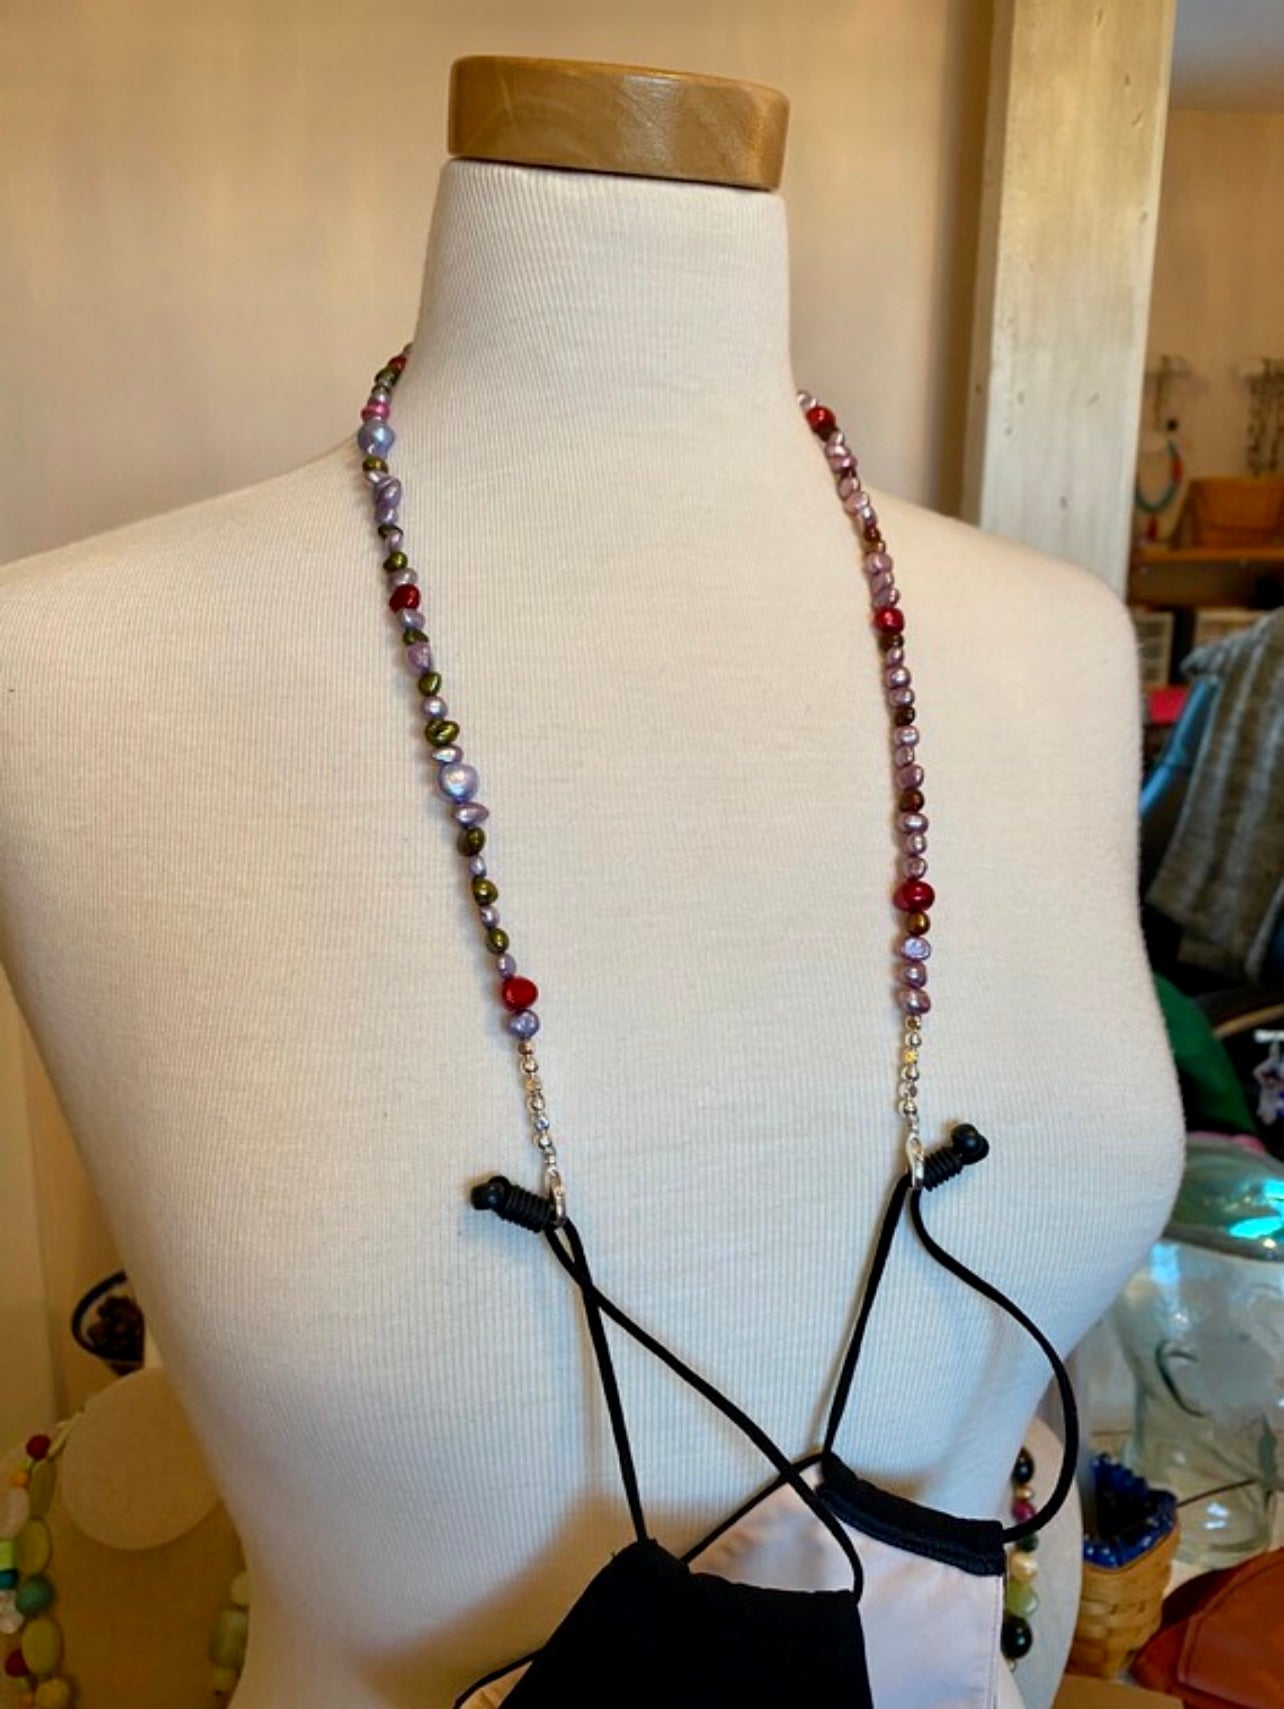 WHOLESALE/BULK PRICING HANDCRAFTED EYEGLASS SUNGLASSES LANYARD CHAINS BEADED FACE MASK CHAINS MUST ORDER 20 PIECES